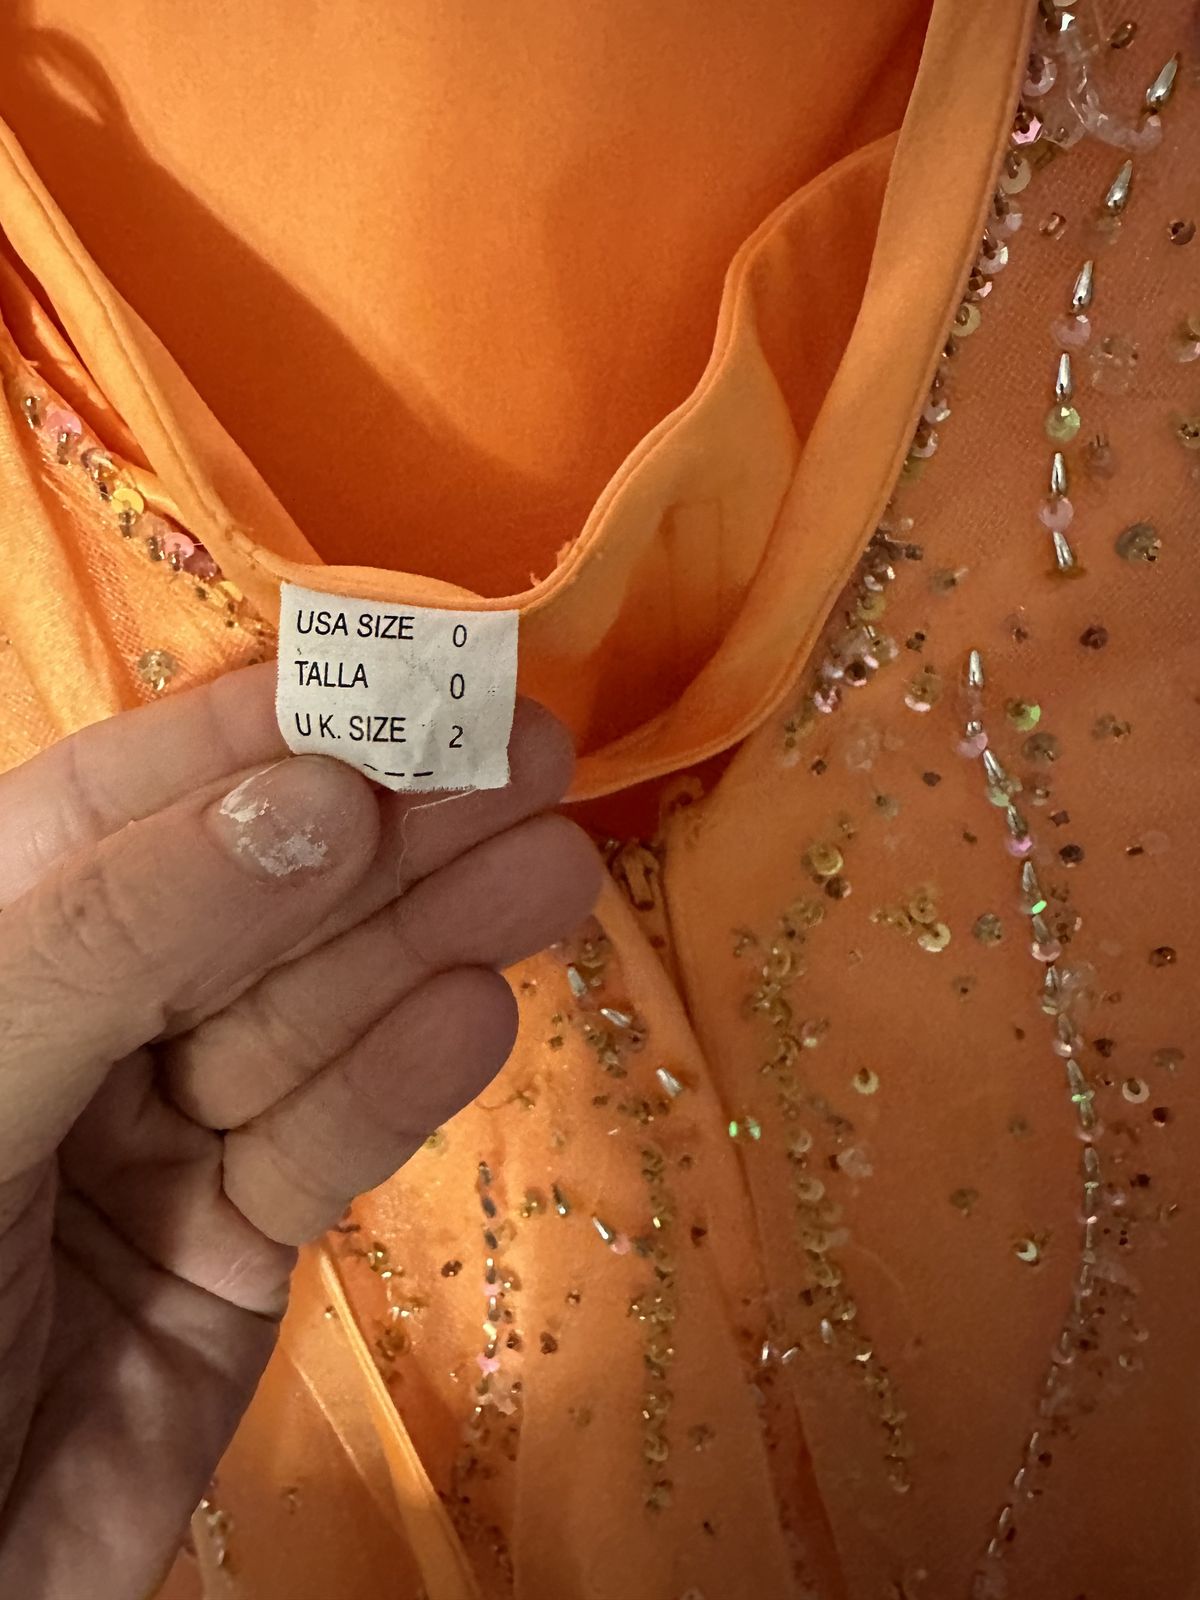 Size 0 Pageant Plunge Orange Ball Gown on Queenly